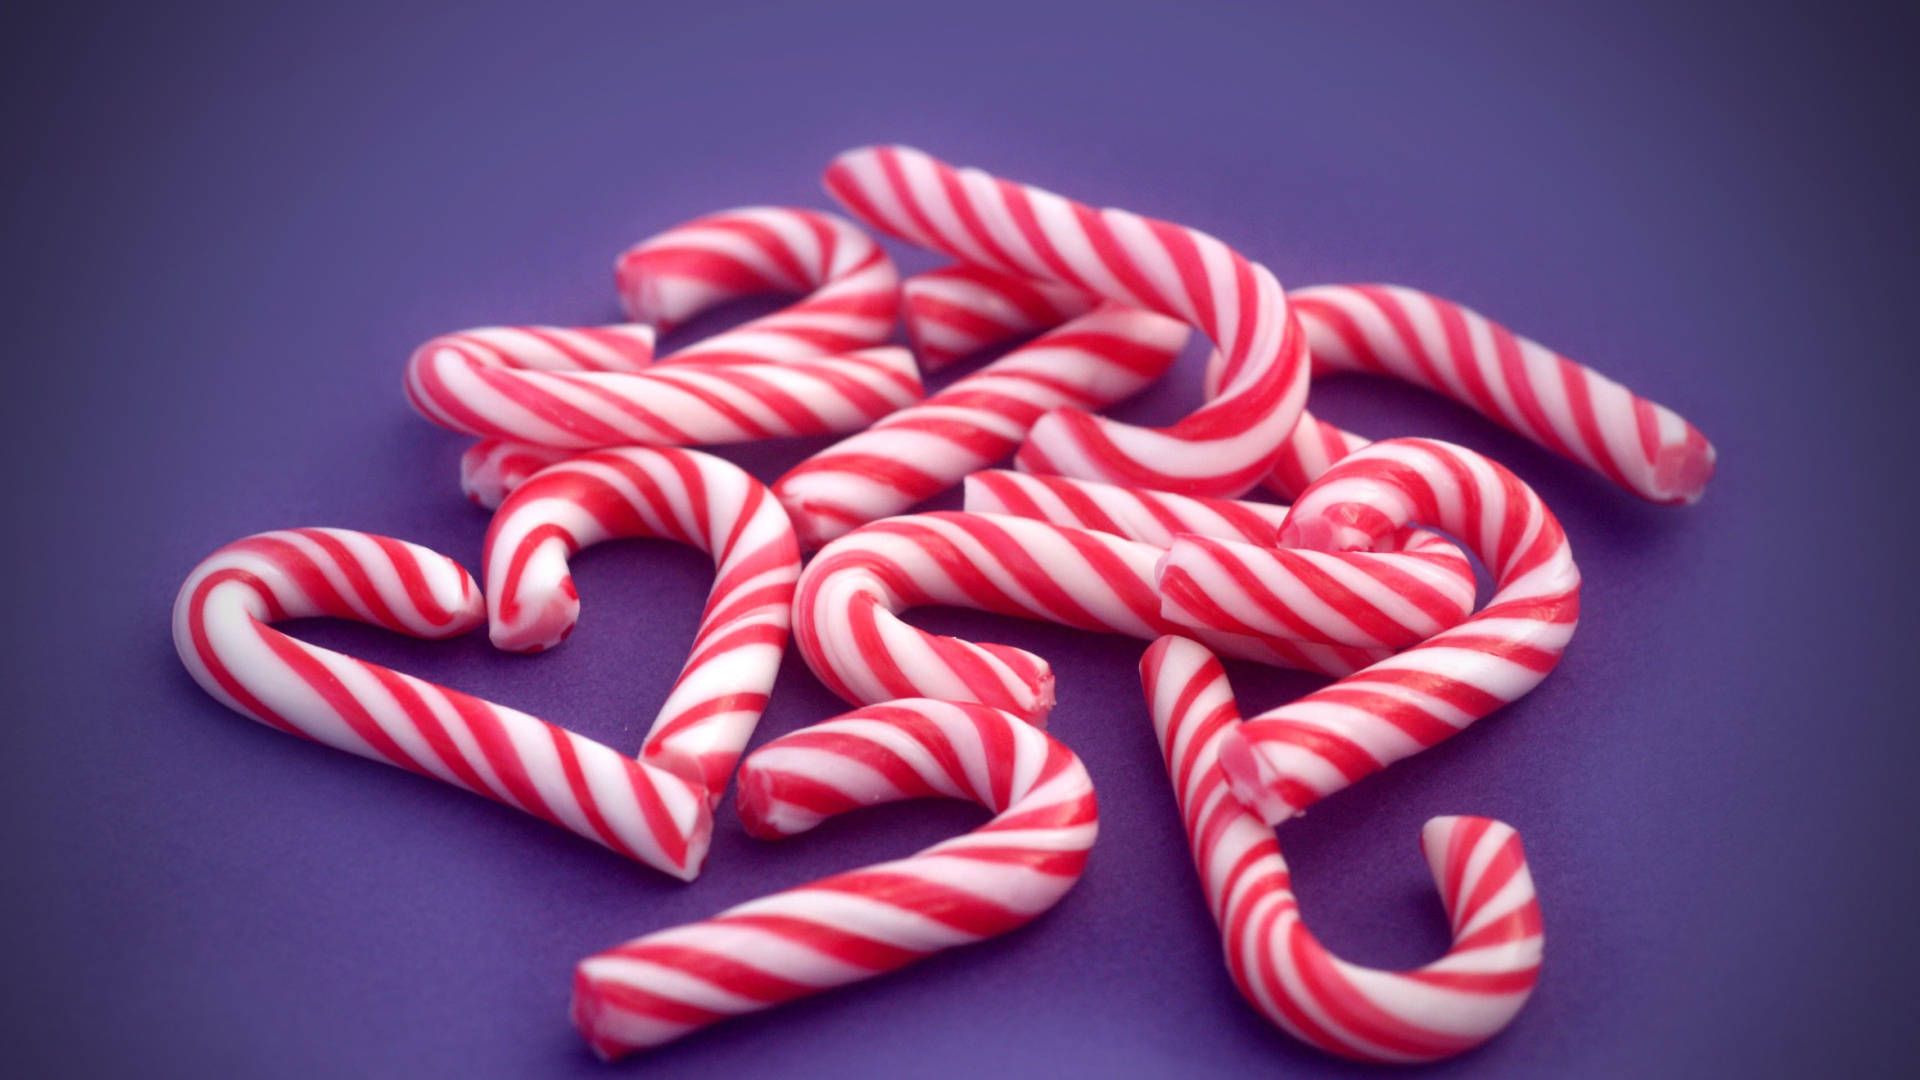 Free Candy Cane Wallpaper Downloads, Candy Cane Wallpaper for FREE